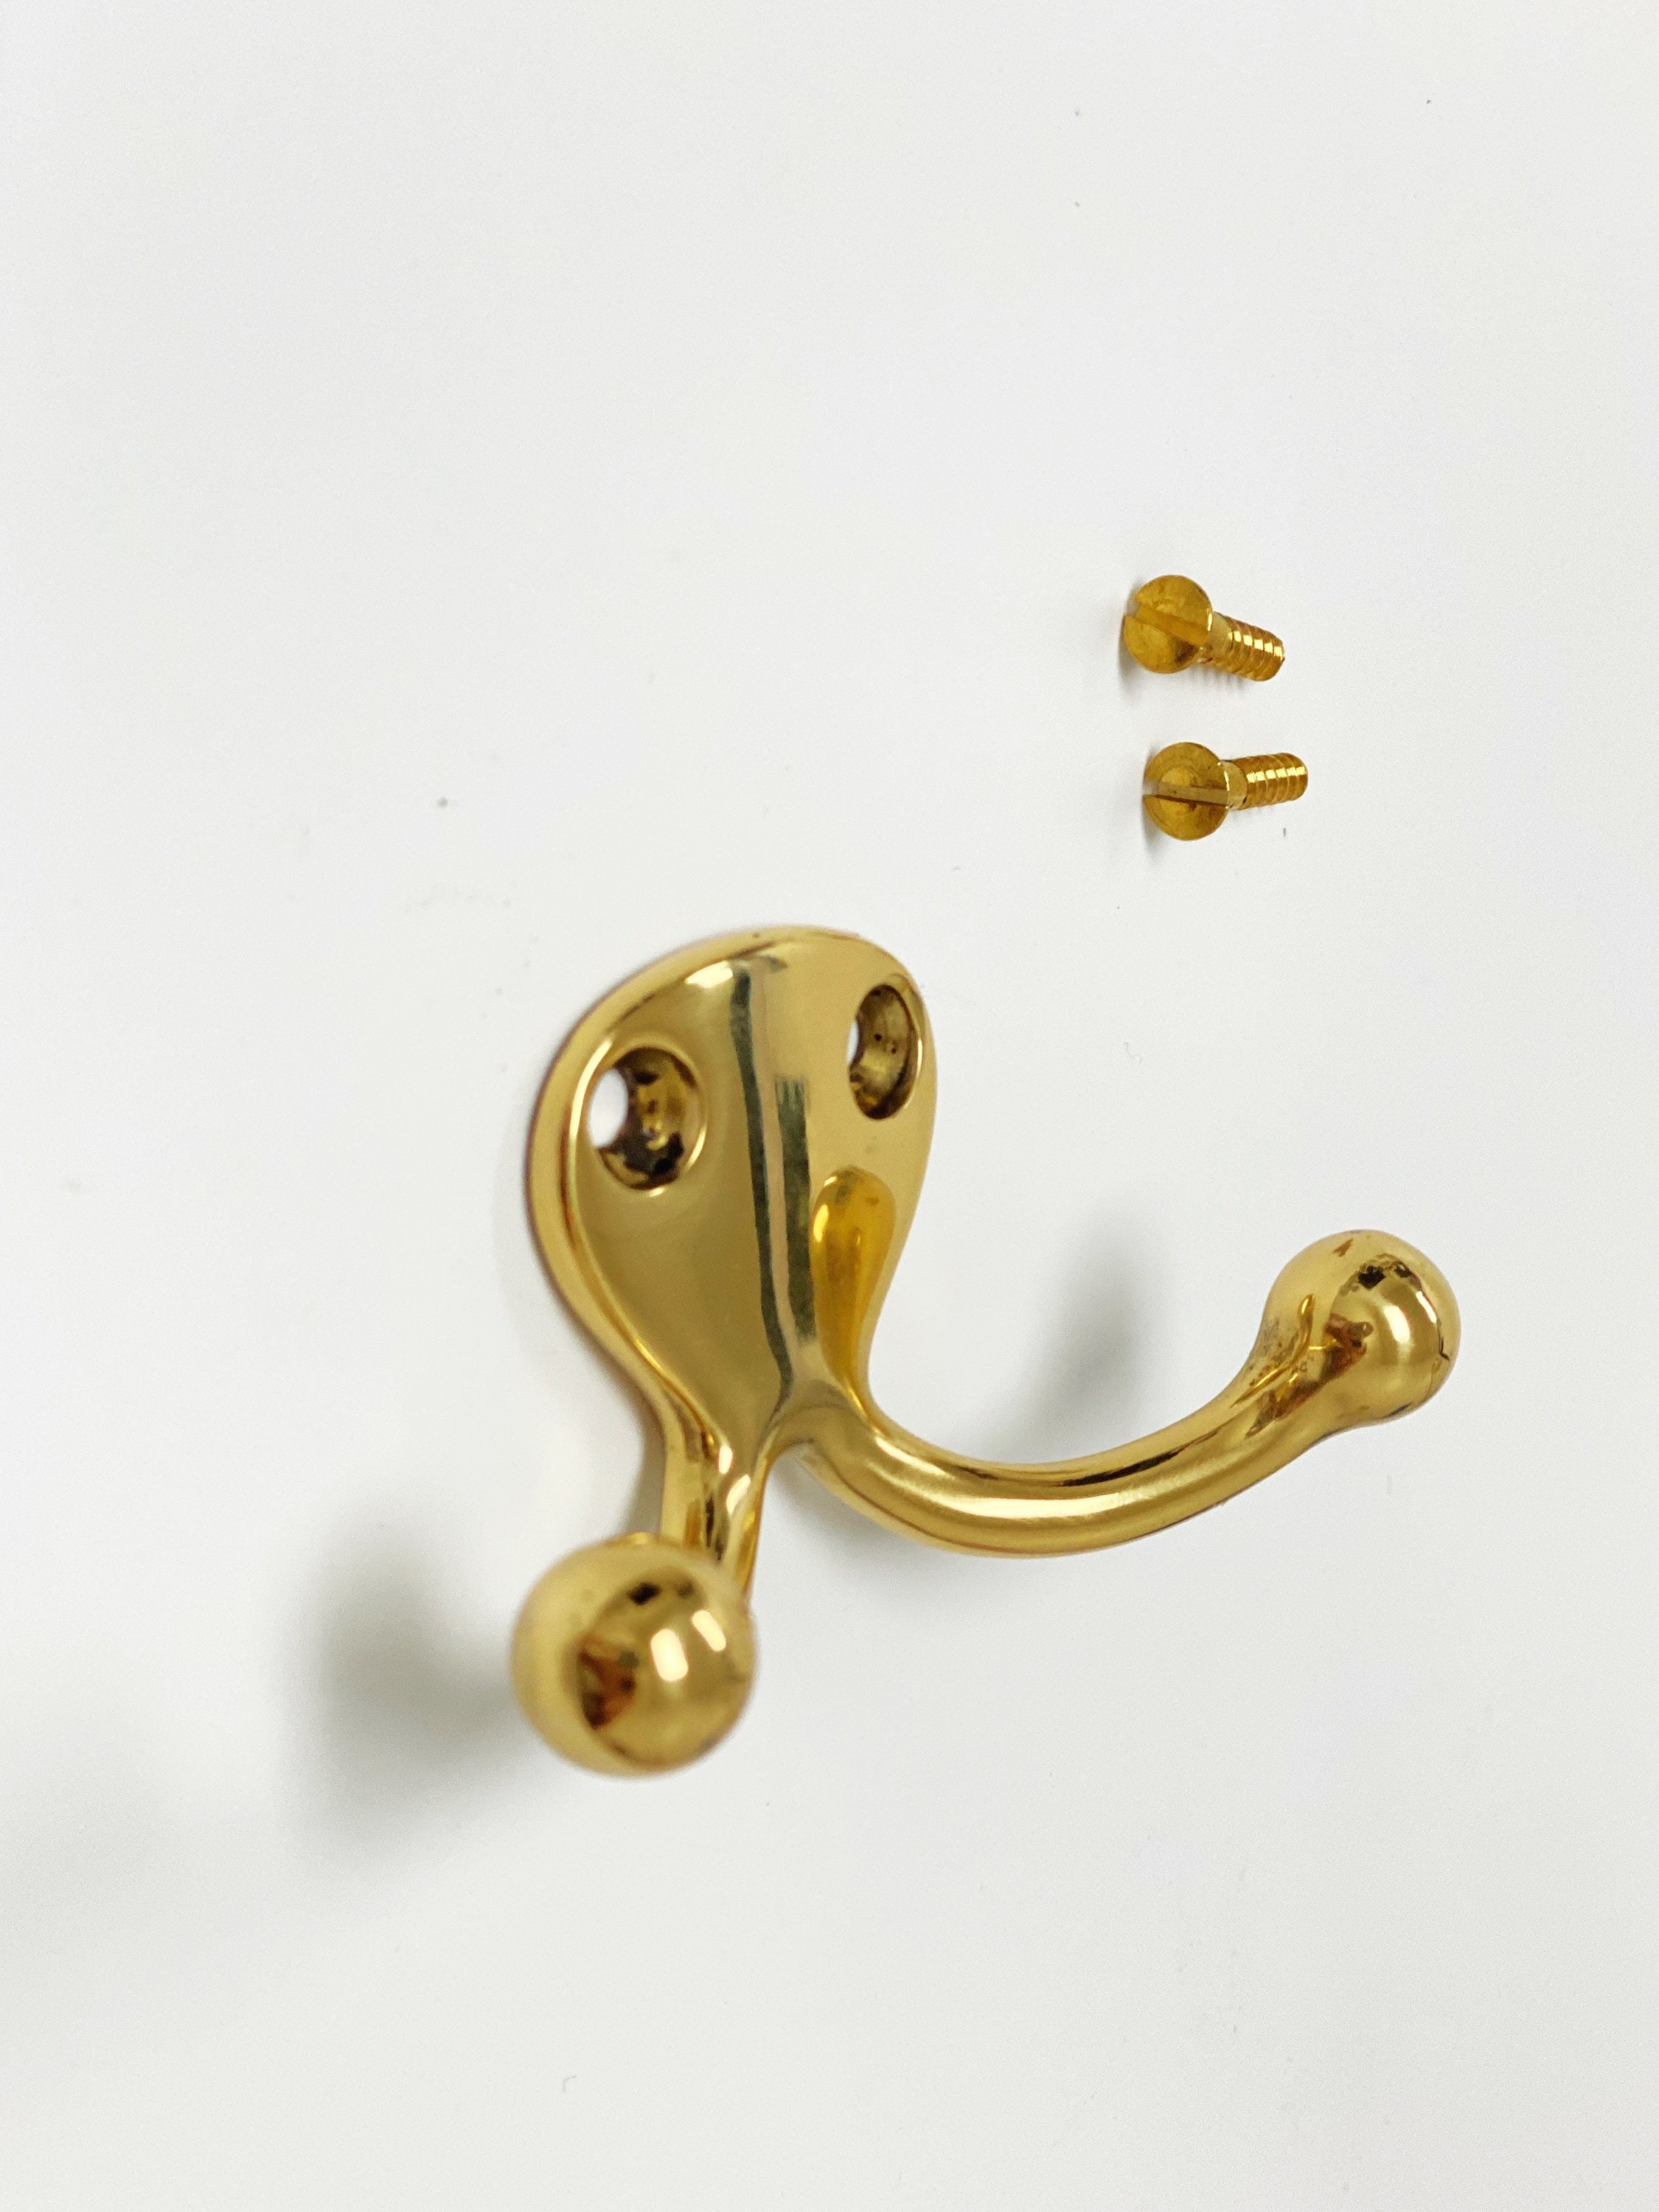 Polished Unlacquered Brass louie Wall Hooks, Brass Wall Coat Hooks Sold per  Piece 